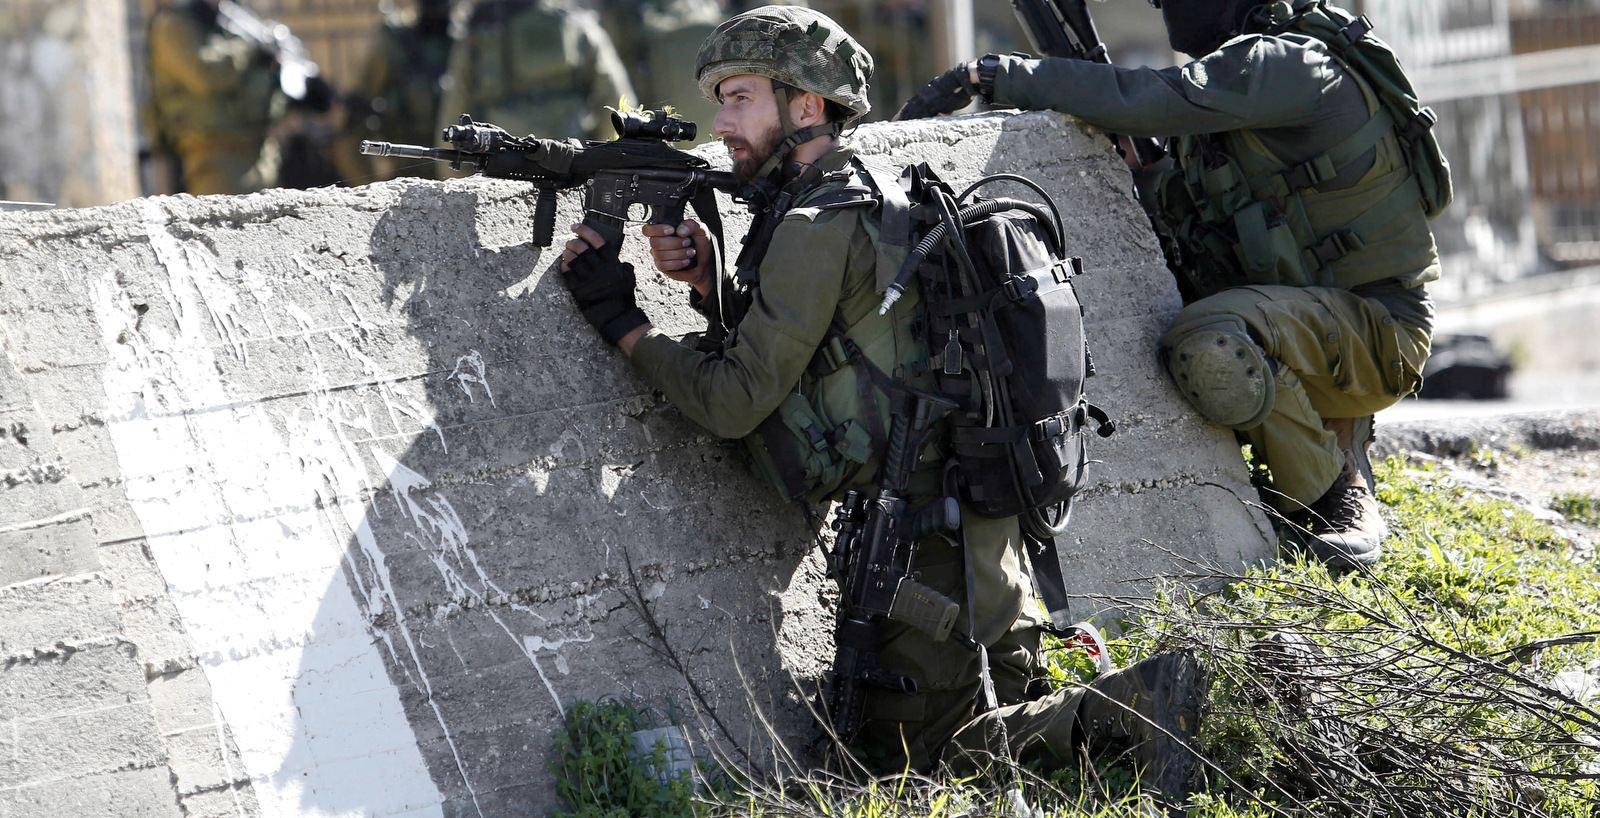 Israeli soldiers during their early morning raid on Amari Palestinian refugee camp, near the West Bank city of Ramallah. Monday, Feb. 15, 2016. (AP Photo/Nasser Shiyoukhi).